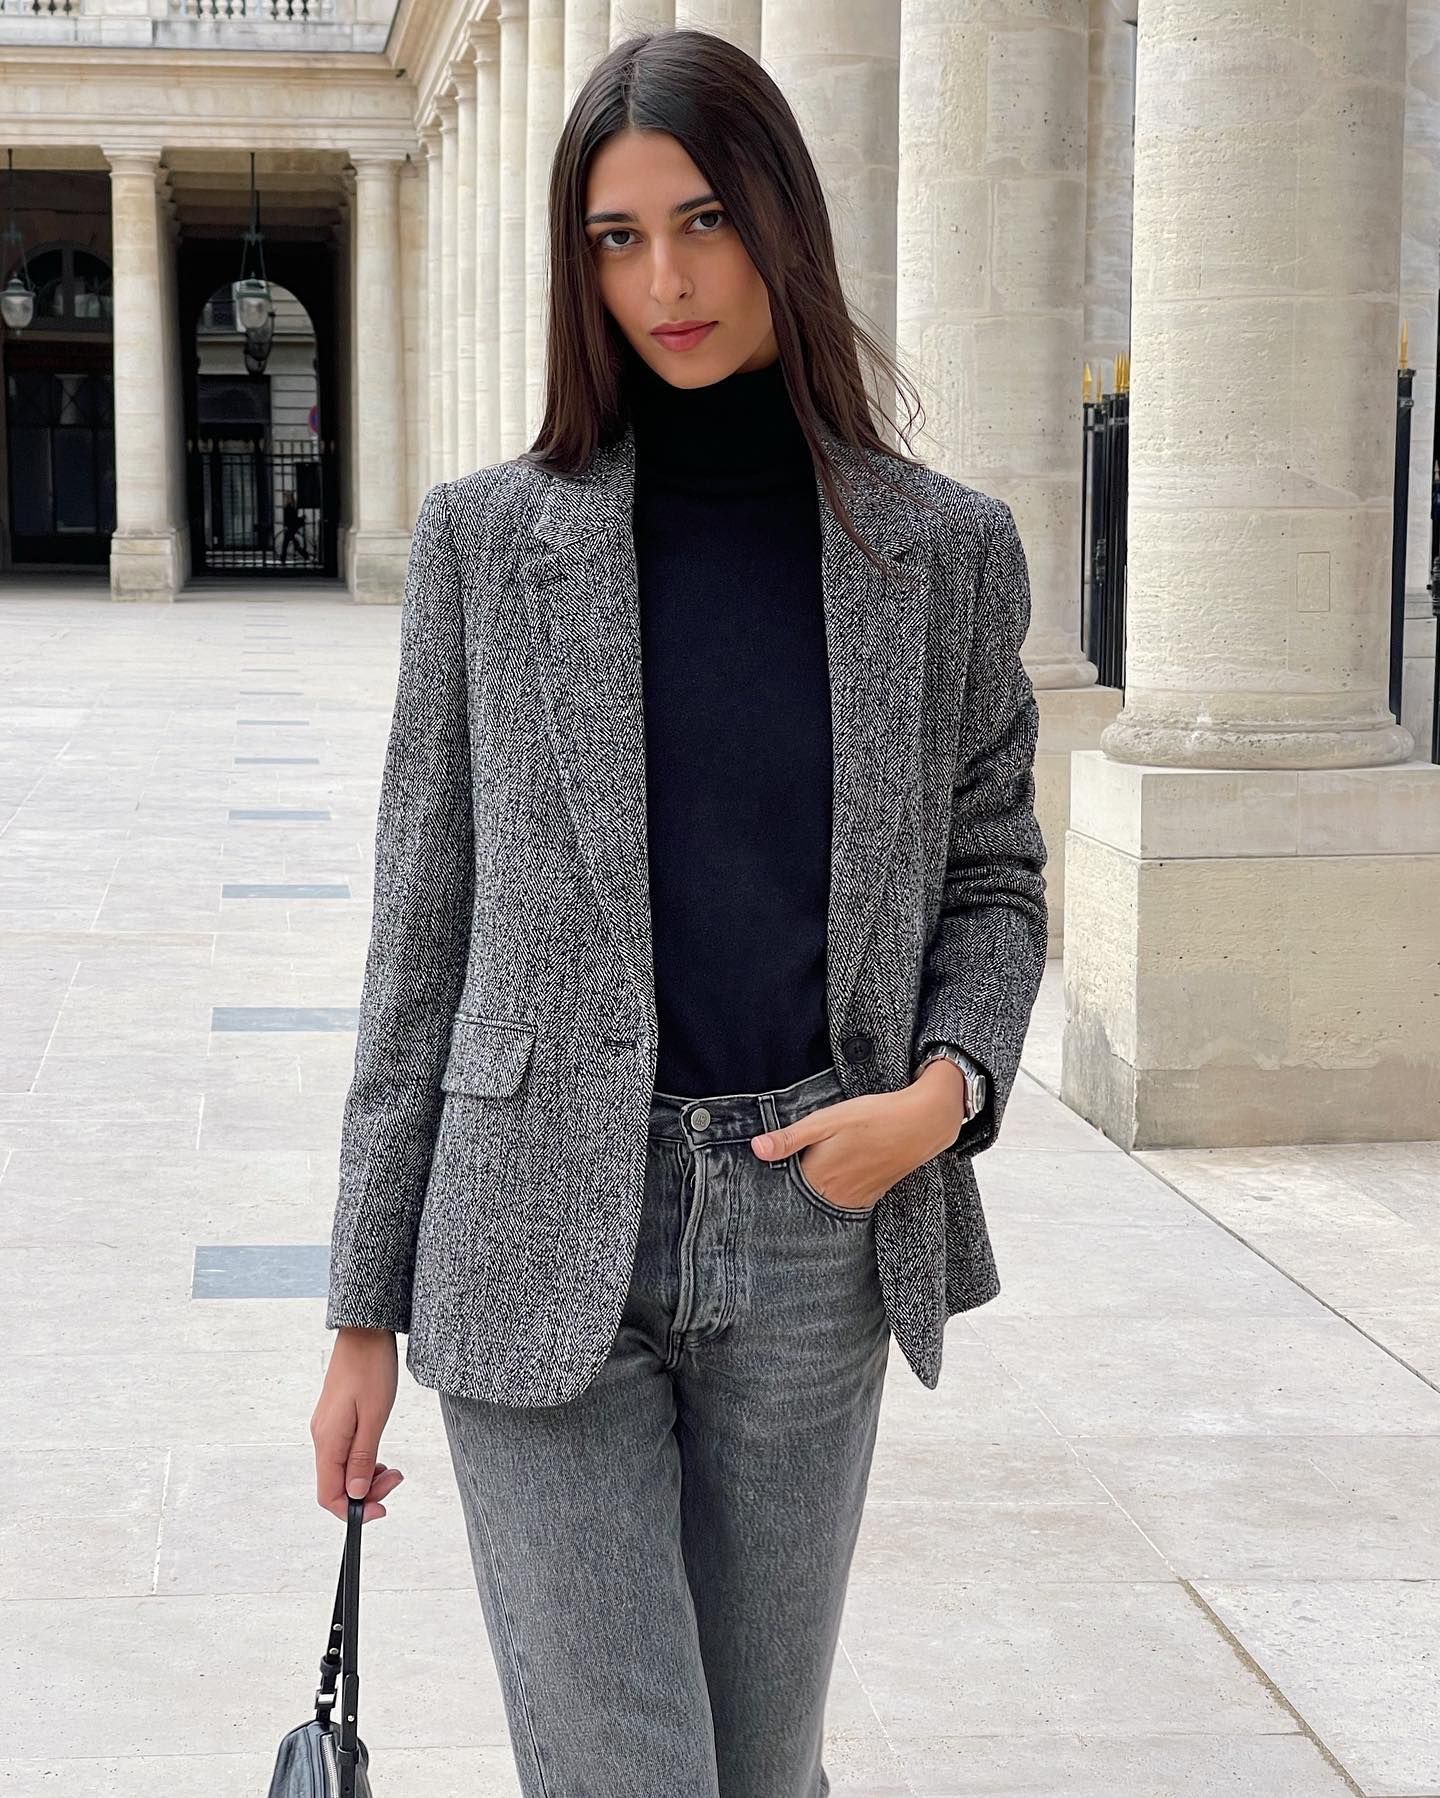 8 Items French Women Wear in Winter to Look Chic | Who What Wear